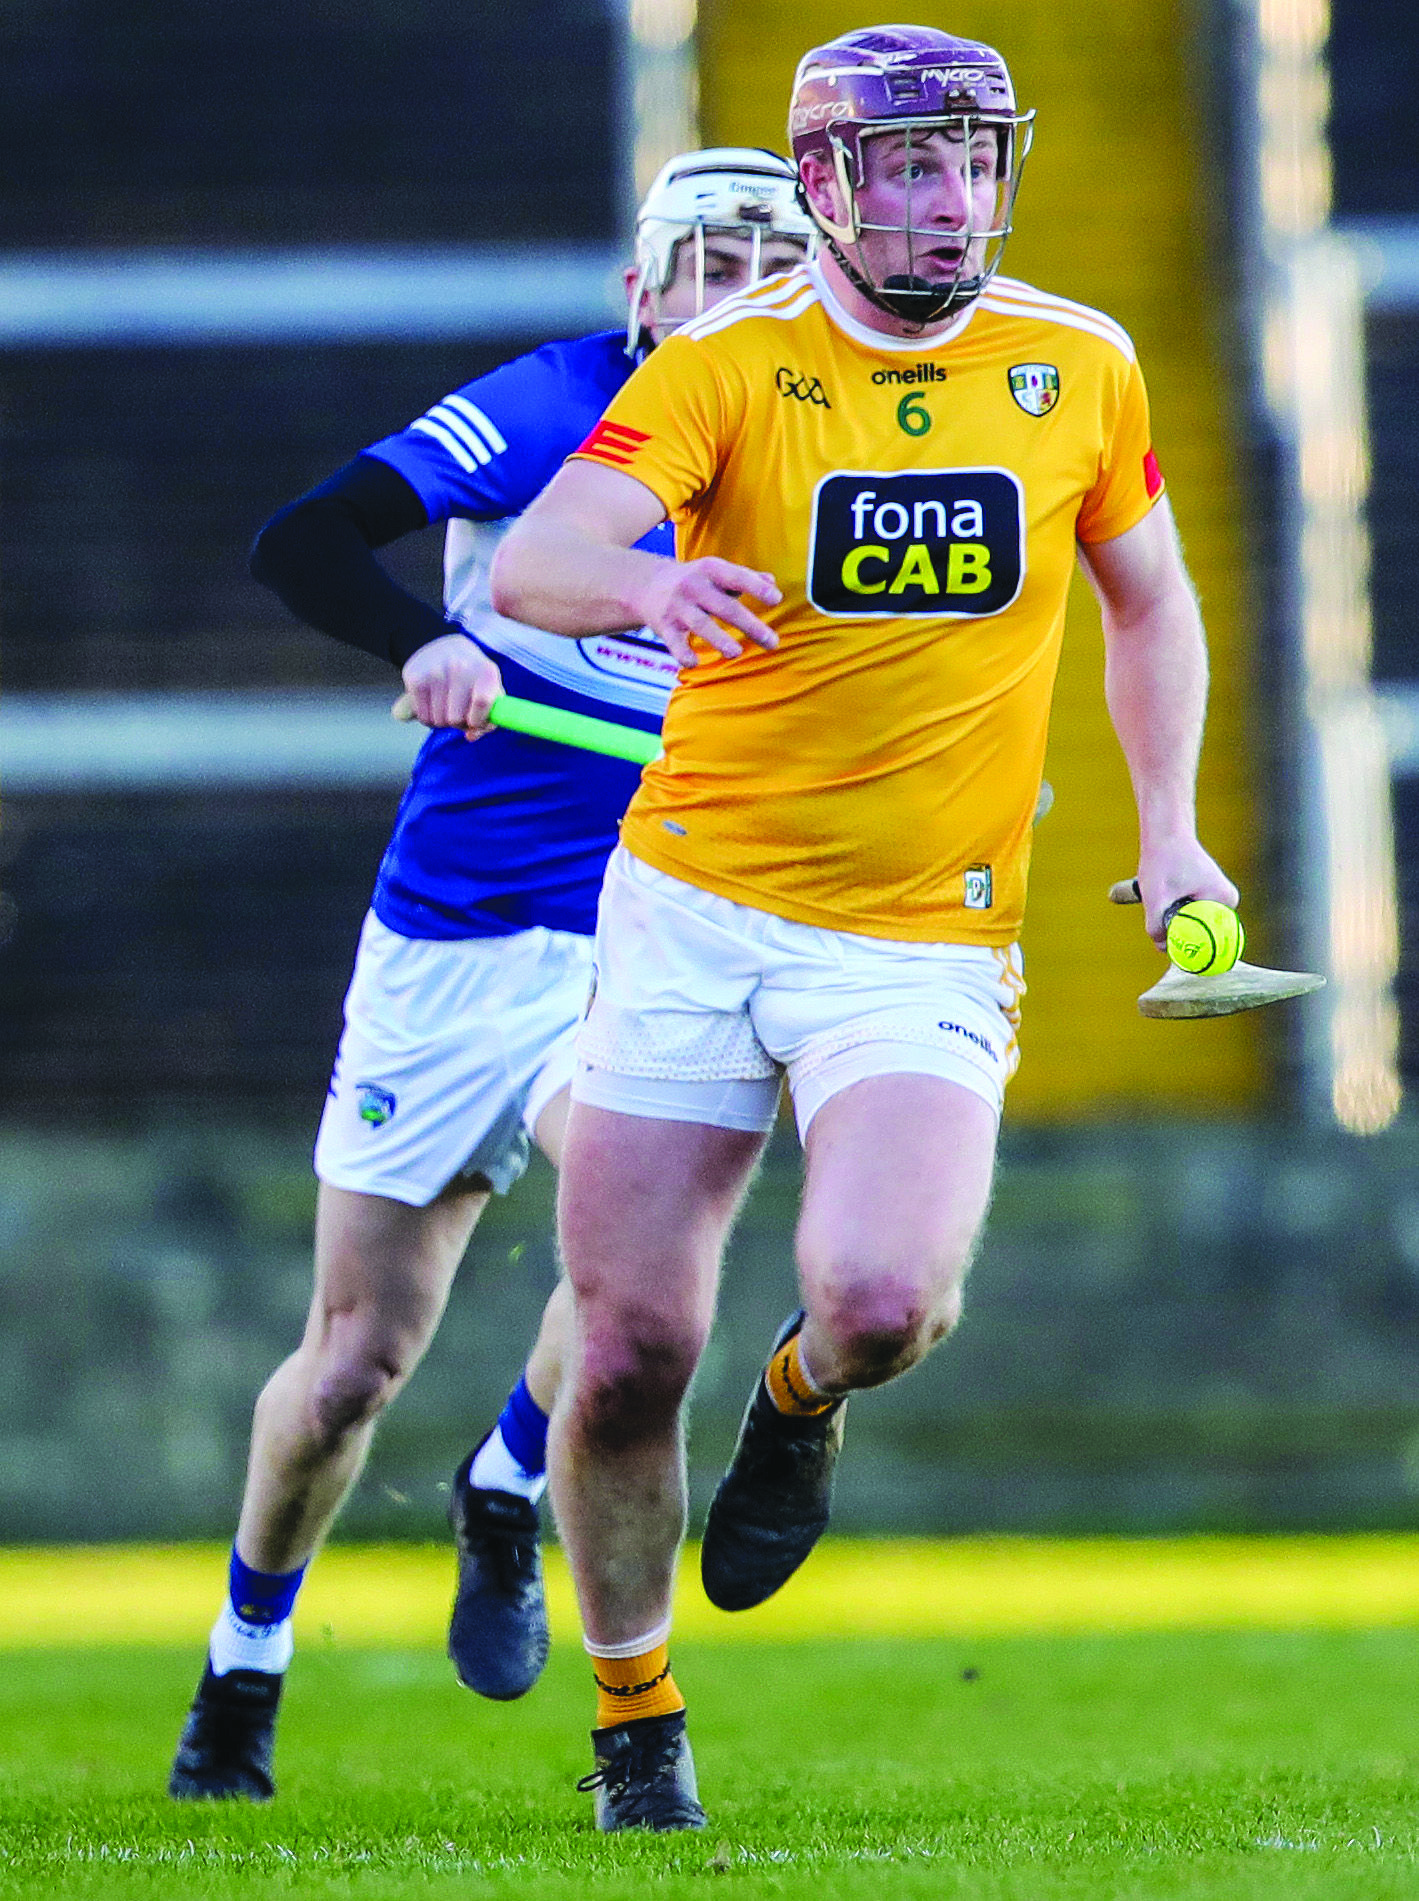 Antrim captain Eoghan Campbell insists the Saffrons are not in bonus territory but instead fully believe they have the tools to cause a stir against Cork on Saturday